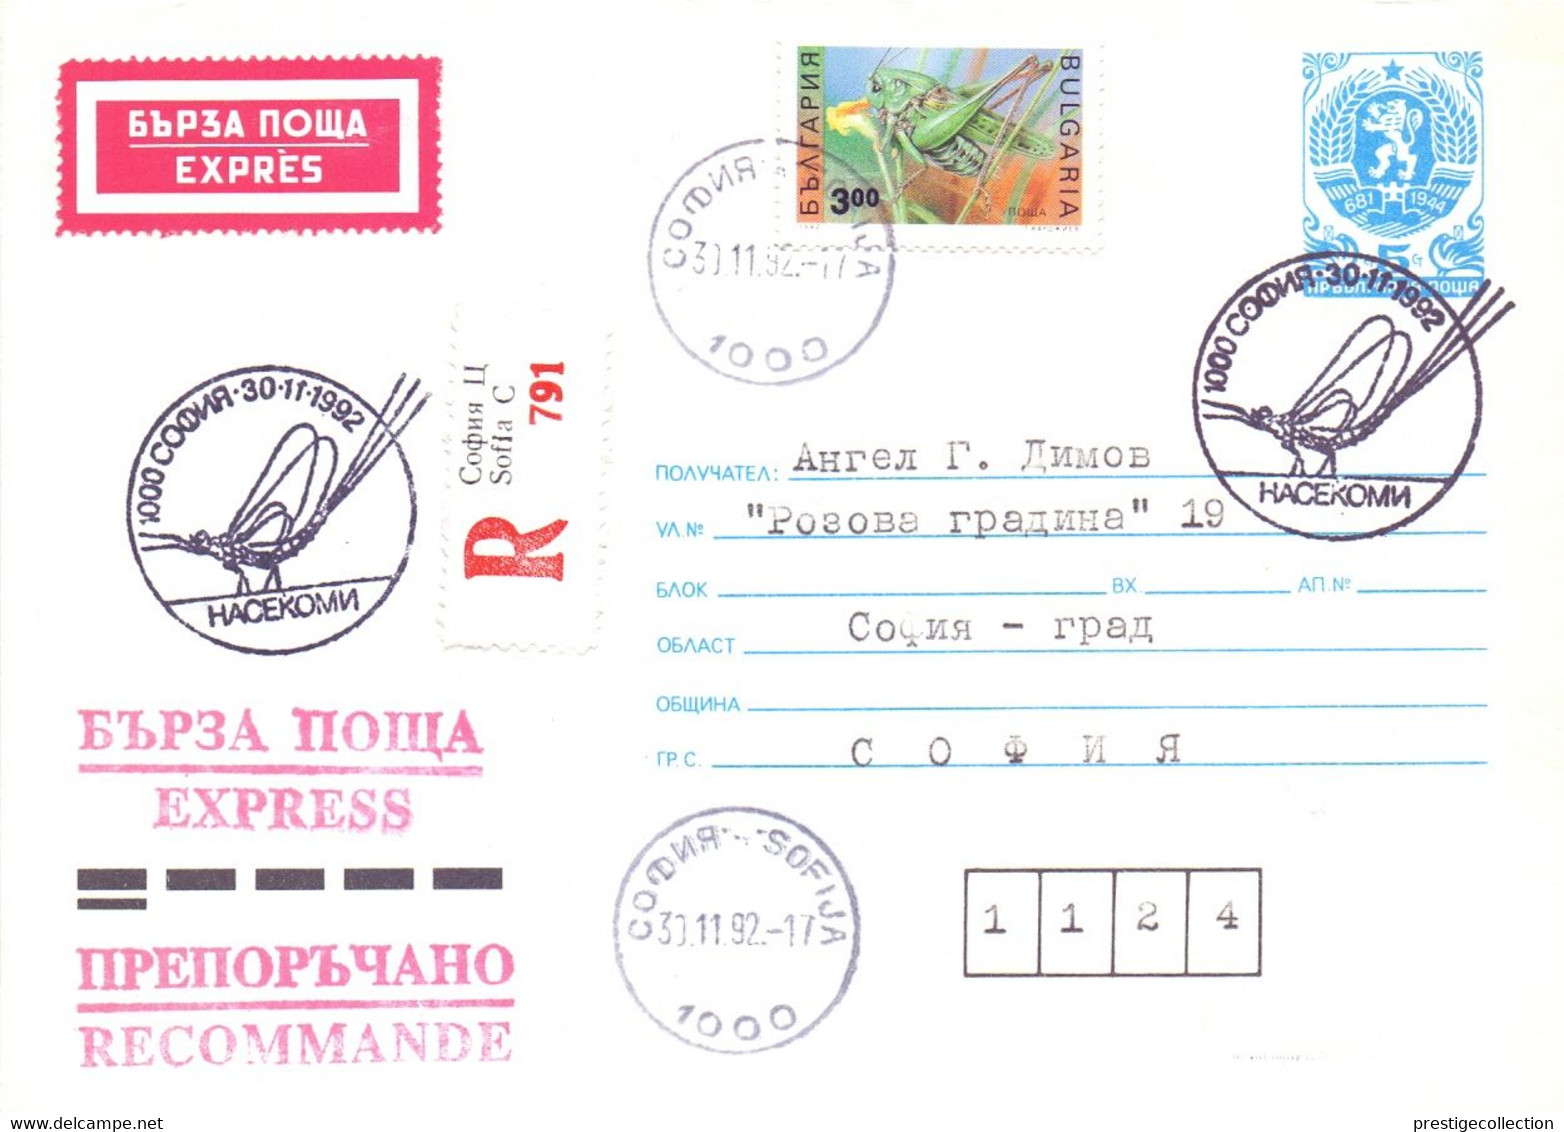 BULGARIA EXPRES  END REGISTRED MAIL 1992  POST MAIL  COVER    (OTT200139) - Eilpost